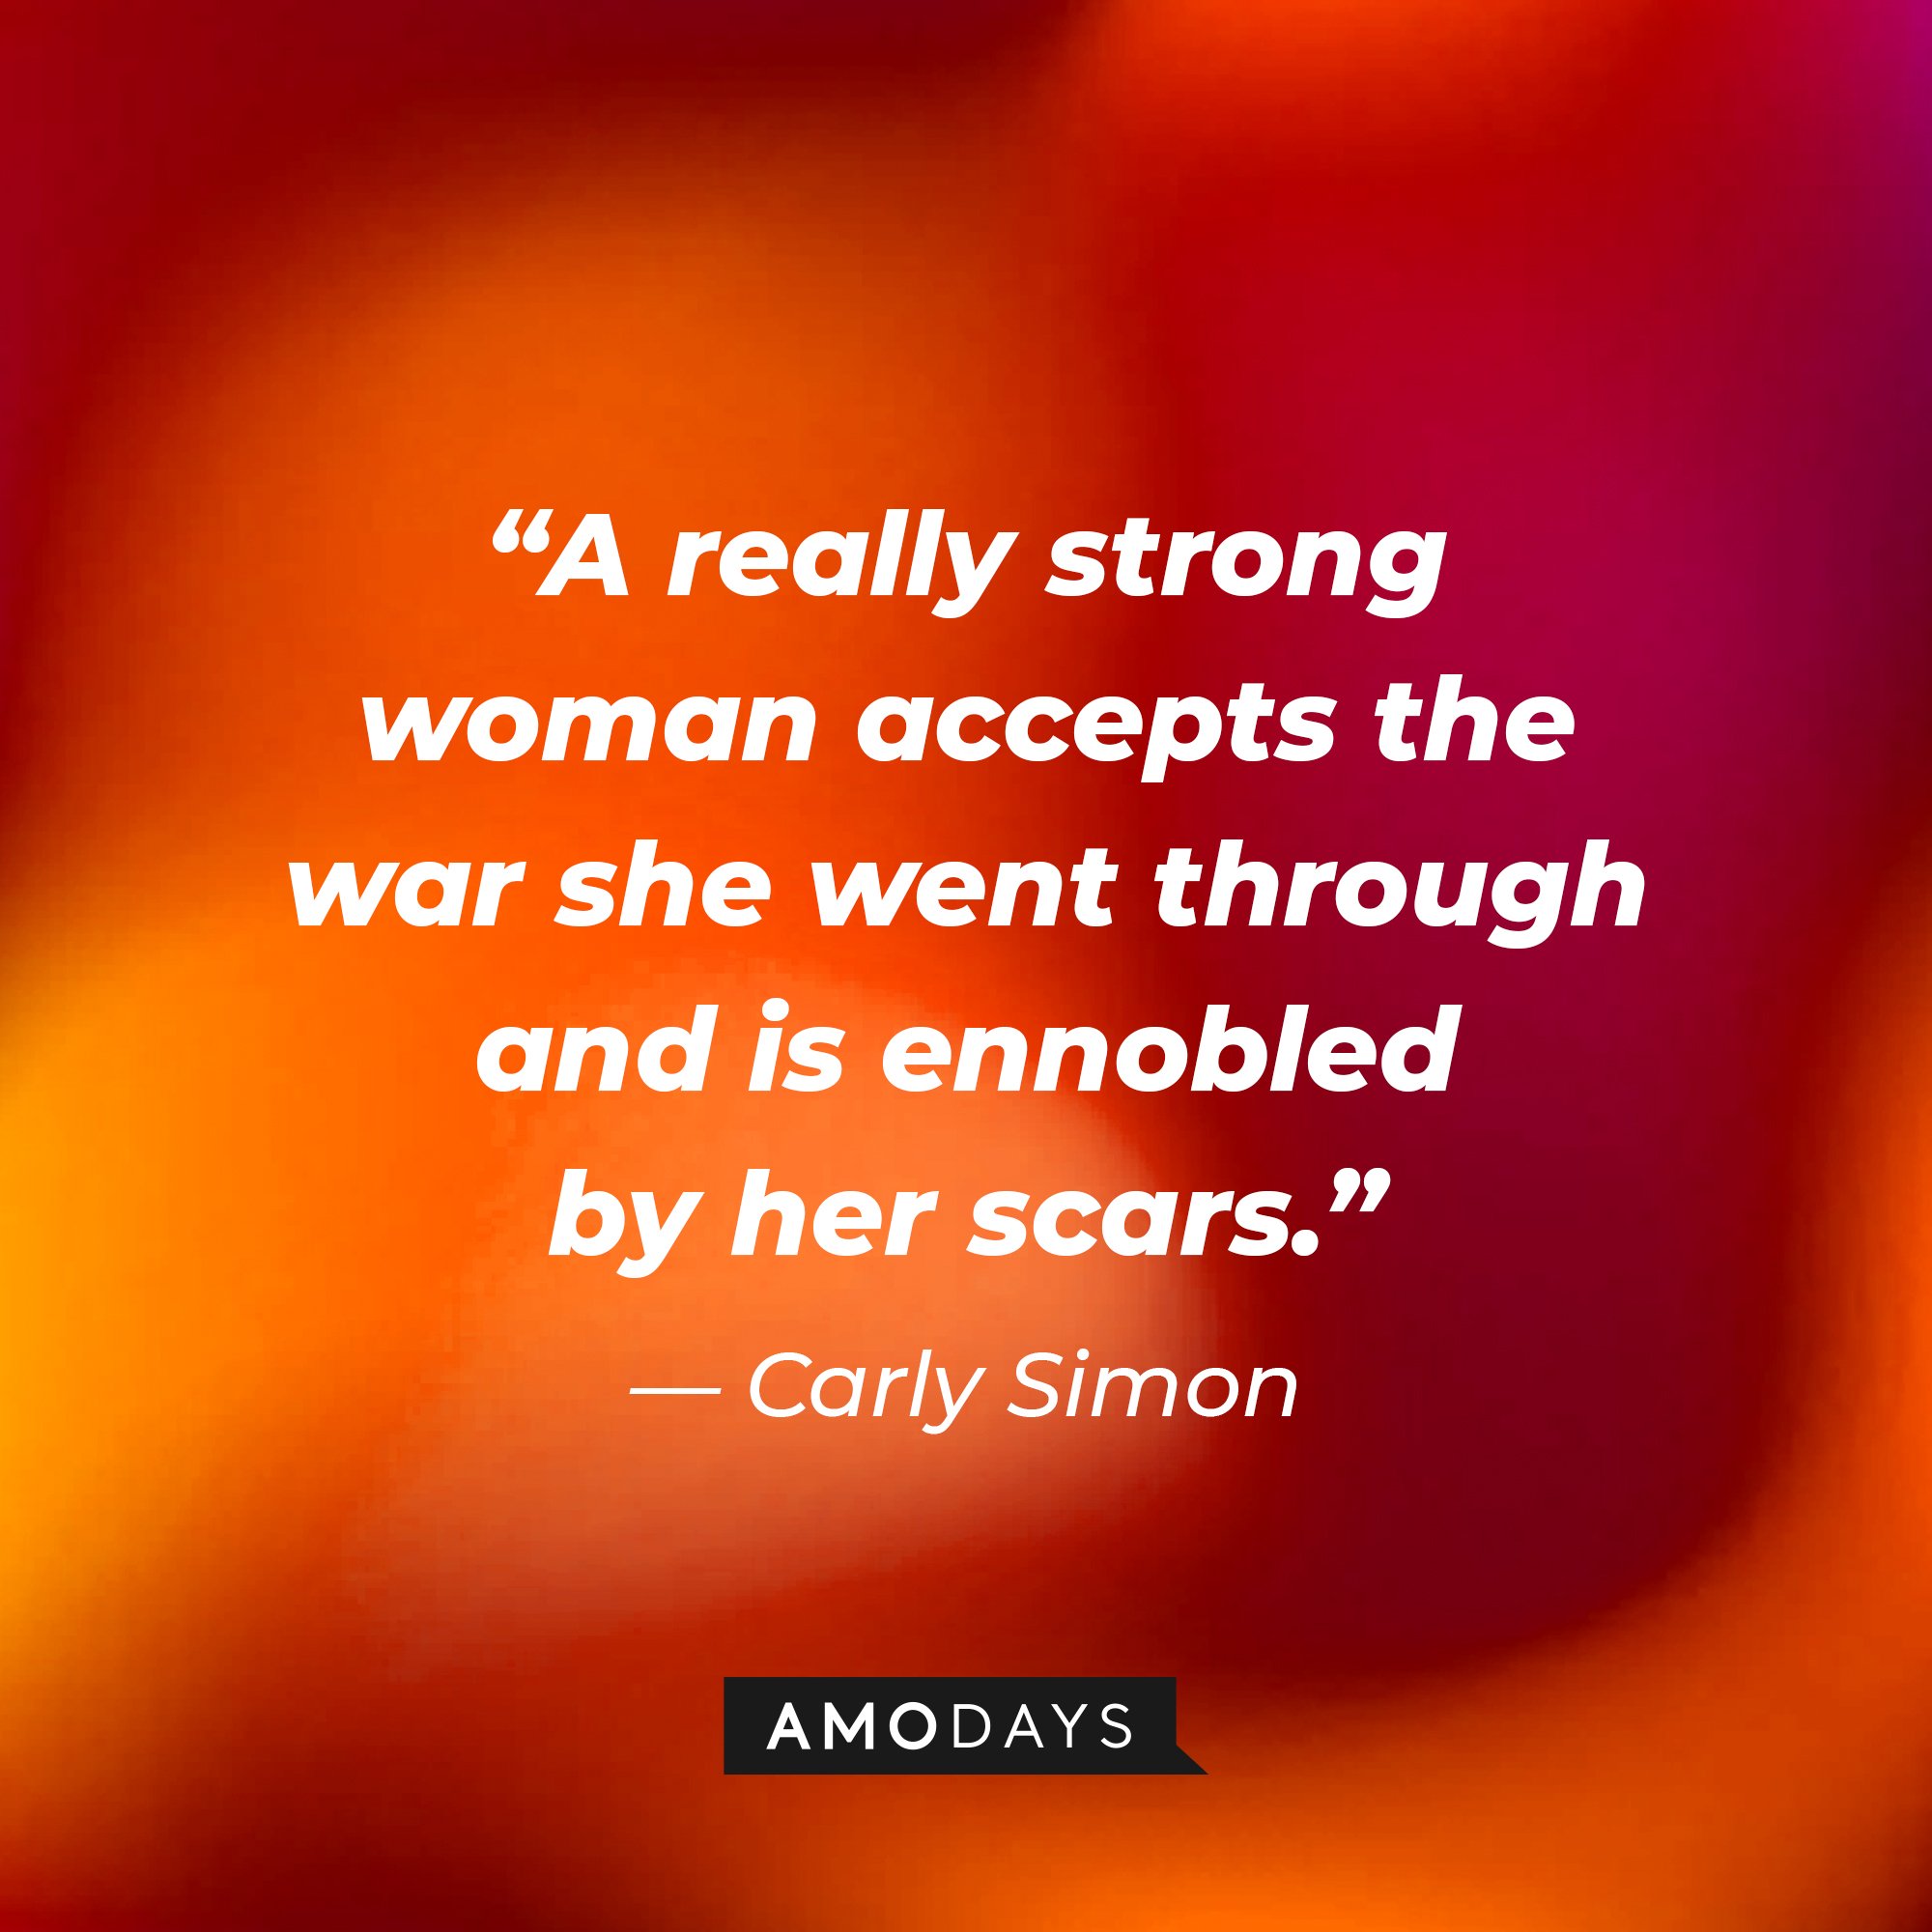 Carly Simon’s quote: “A really strong woman accepts the war she went through and is ennobled by her scars.” | Image: AmoDays